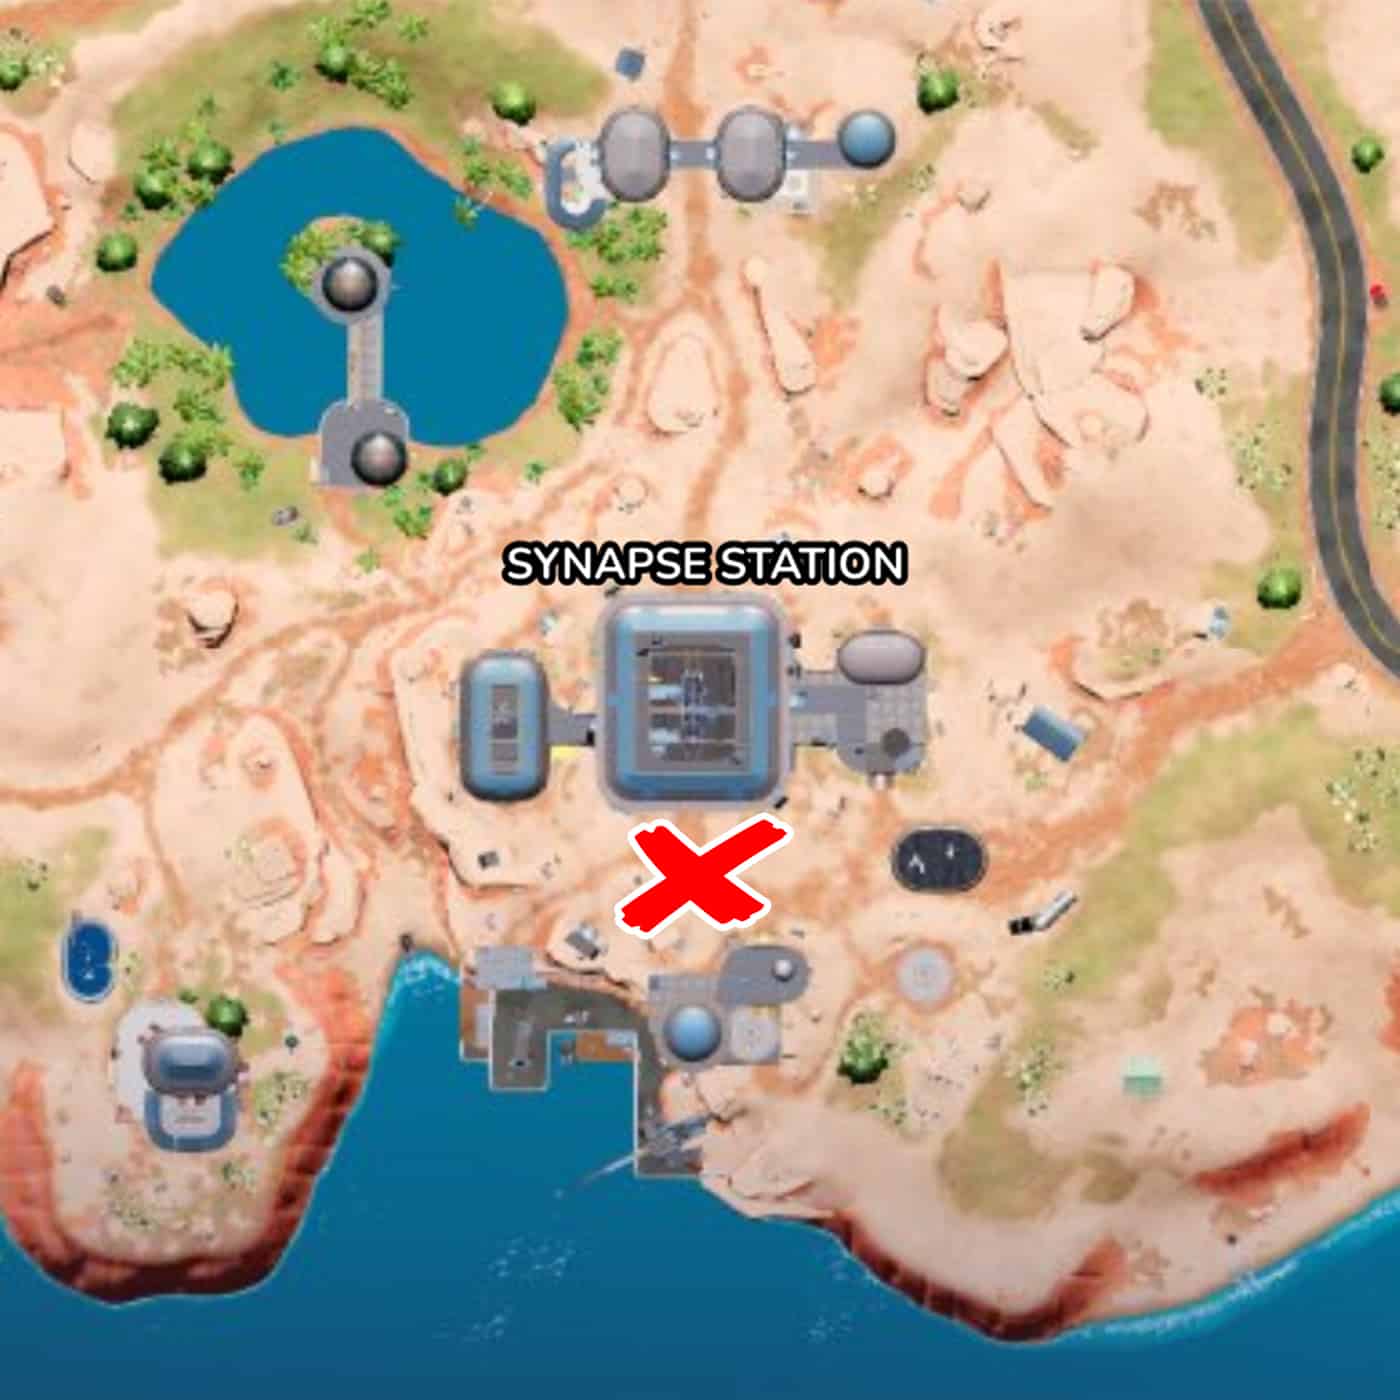 The battle bus location at Synapse Station in Fortnite